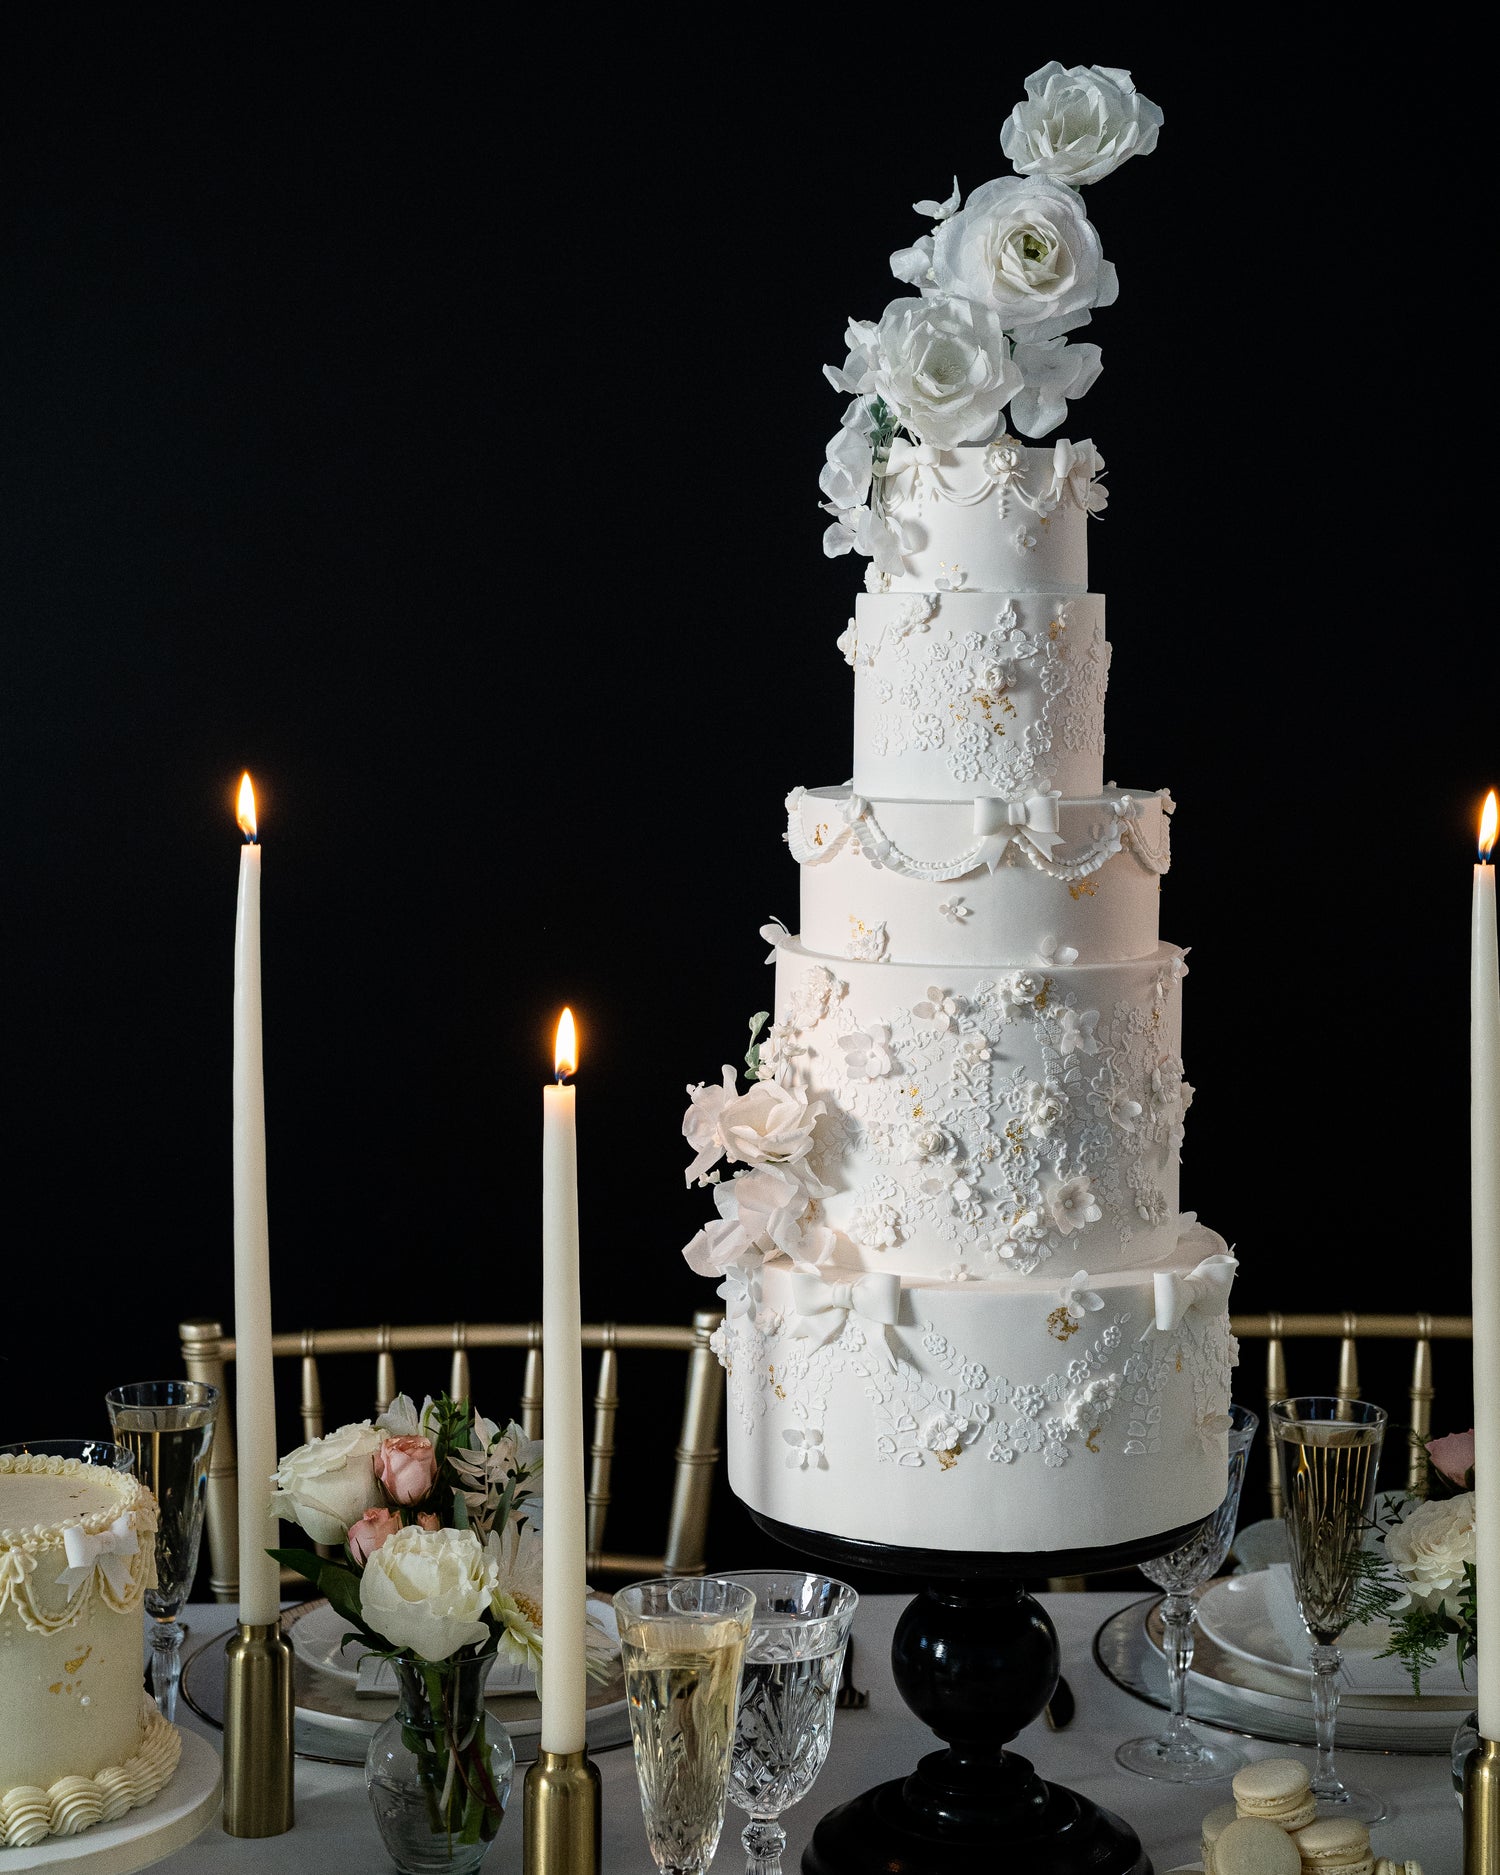 tall white wedding cake by sugar nursery in halifax, nova scotia, inspired by bridal dresses decorated with sugar flowers and lace